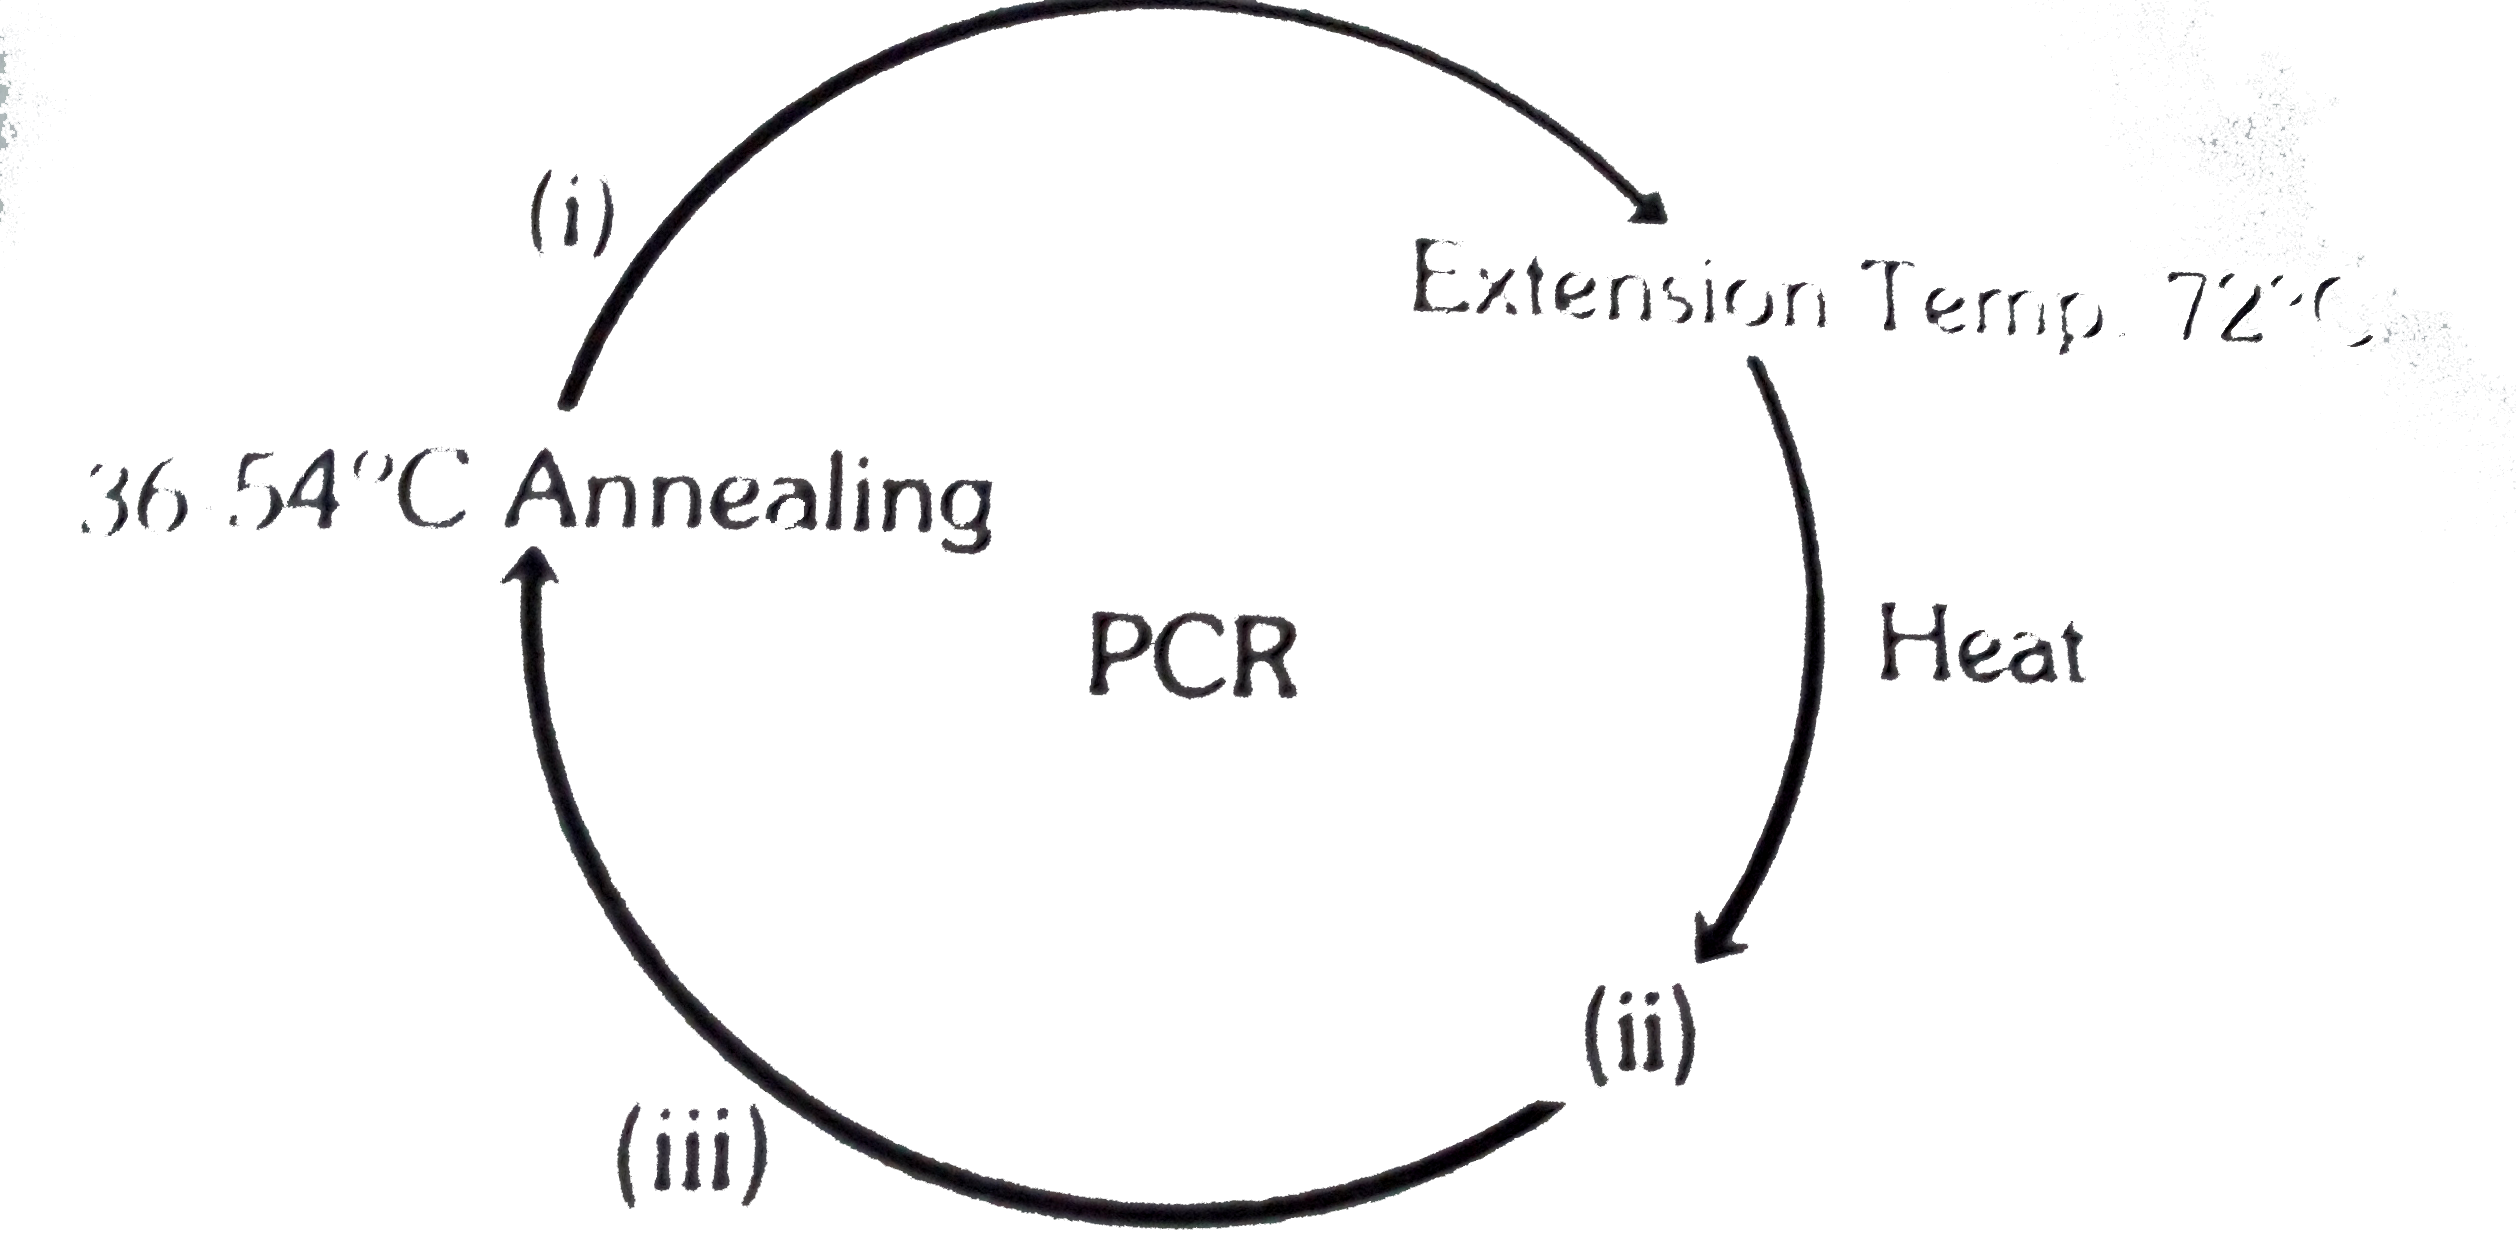 The following cycle refer to the PCR prcess, name the factors or steps indicated with numbers